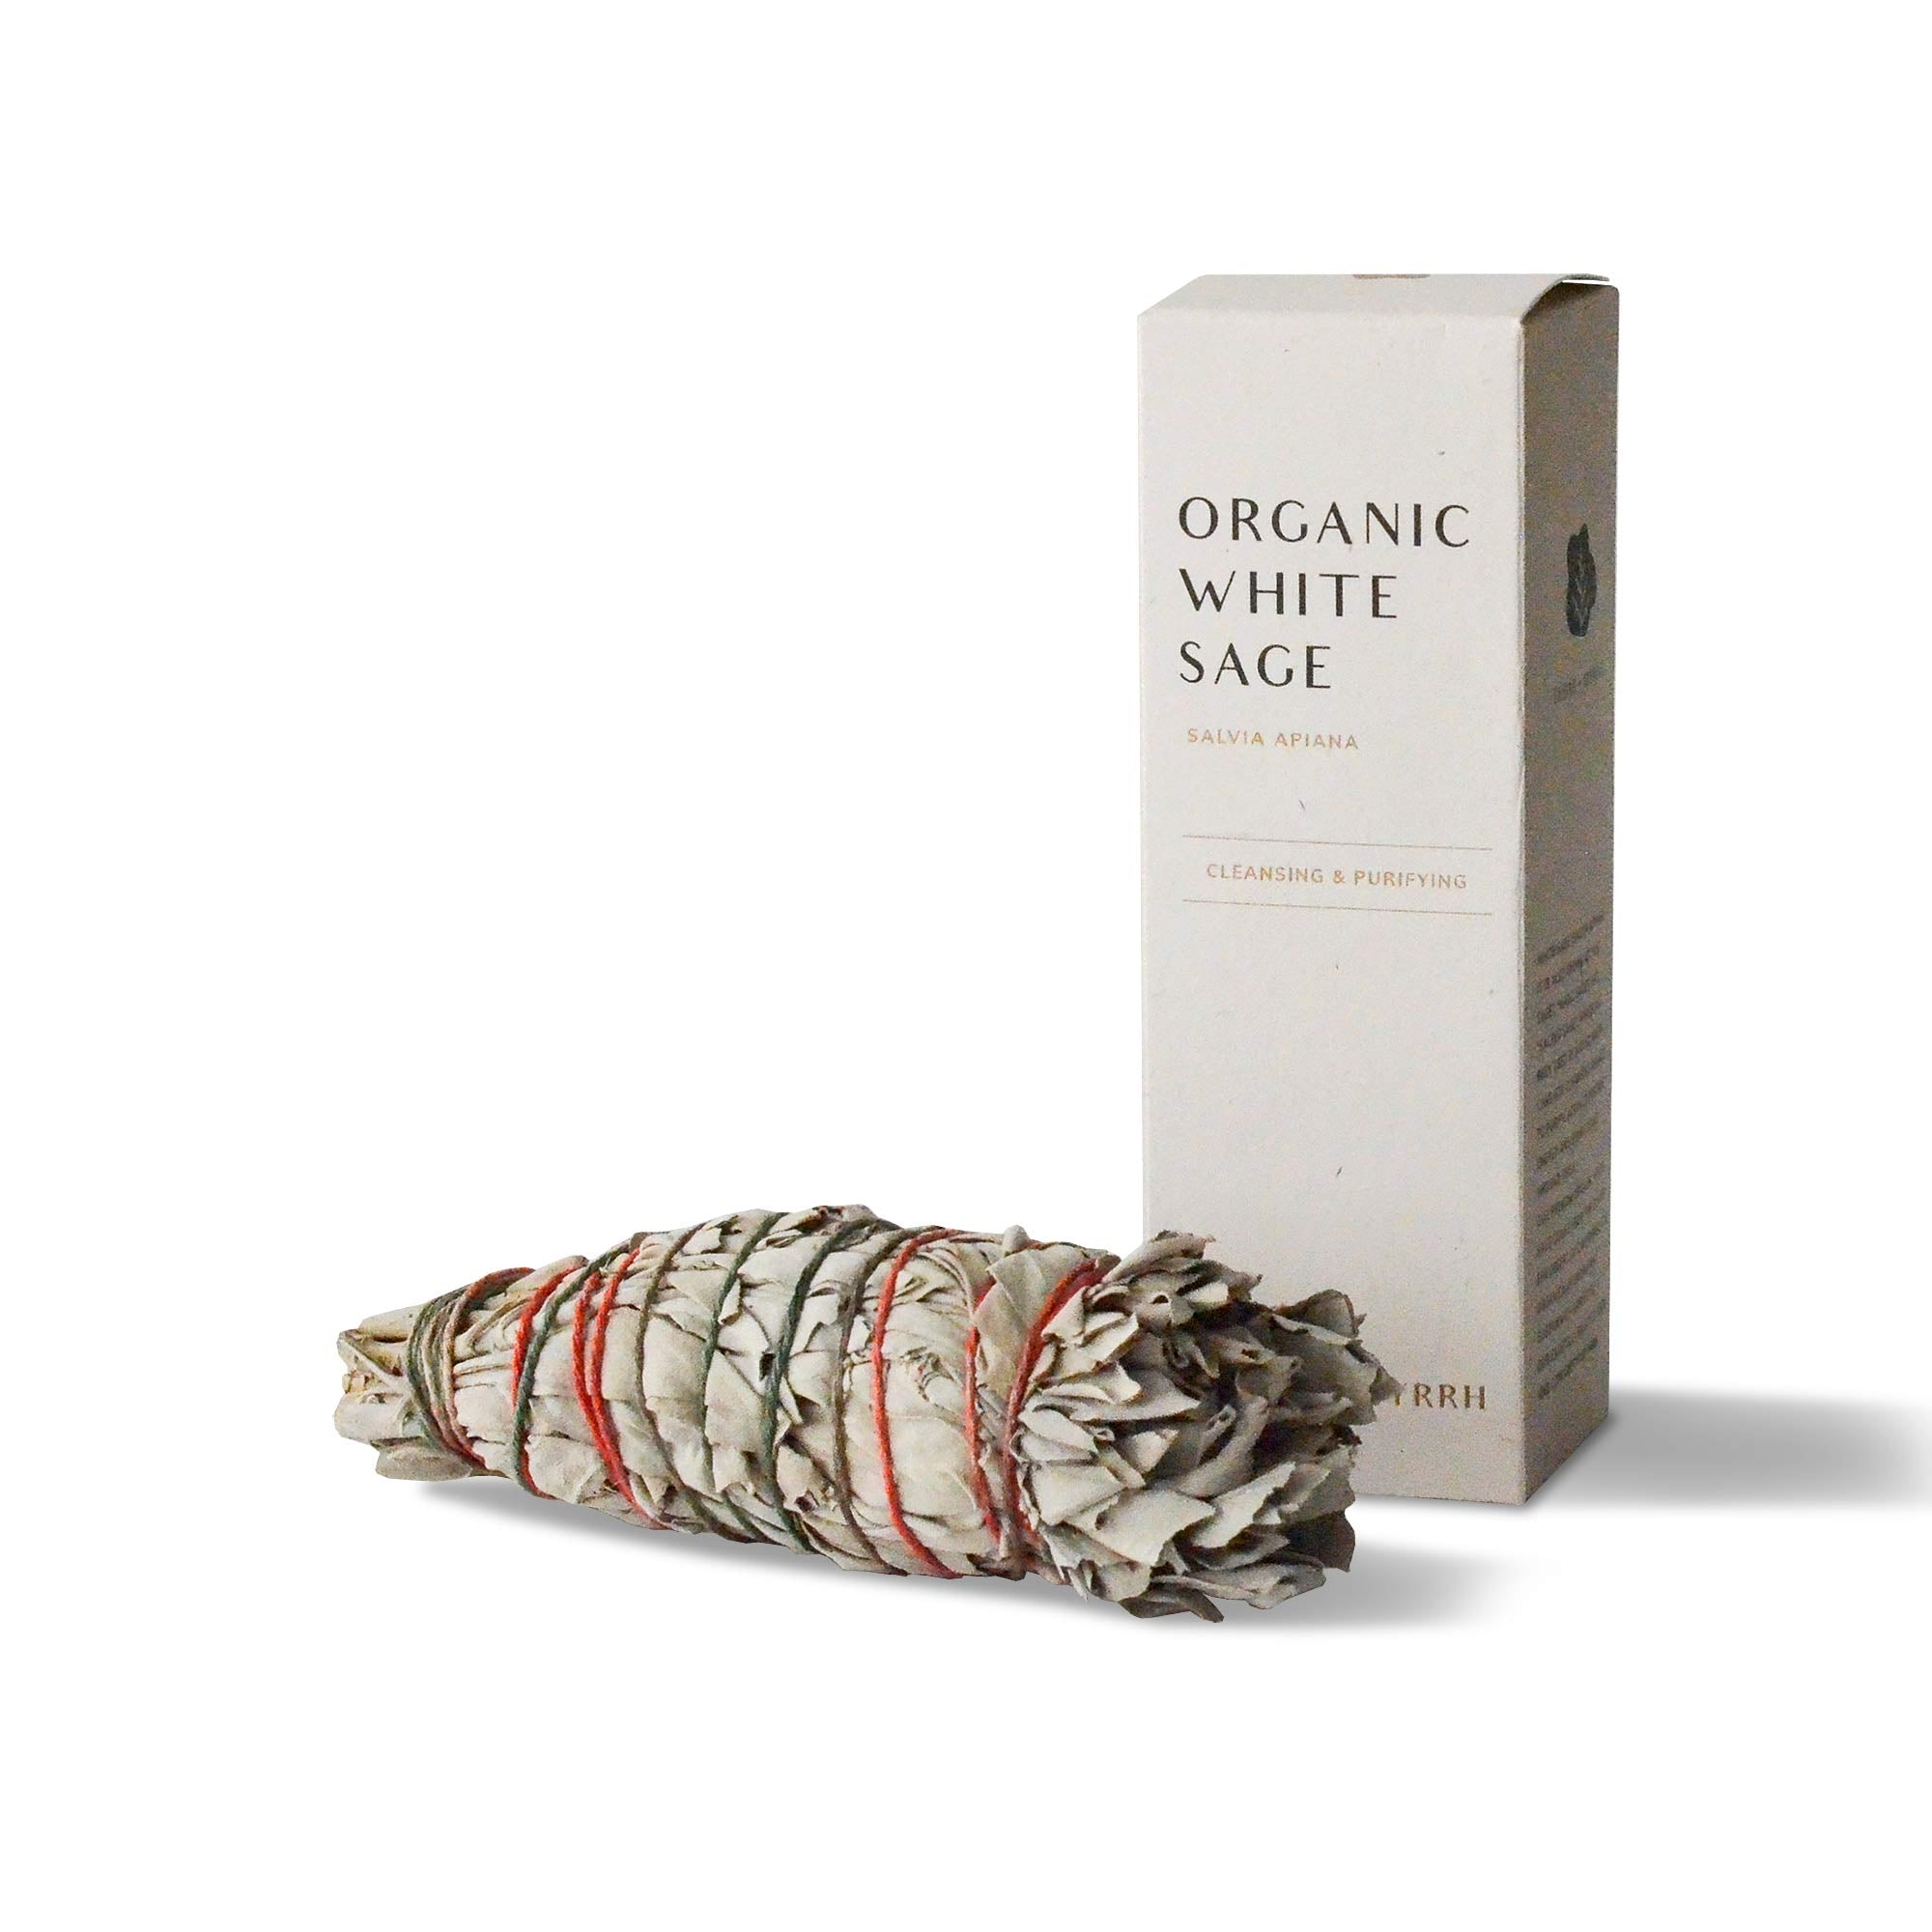 white sage smudge stick with the package